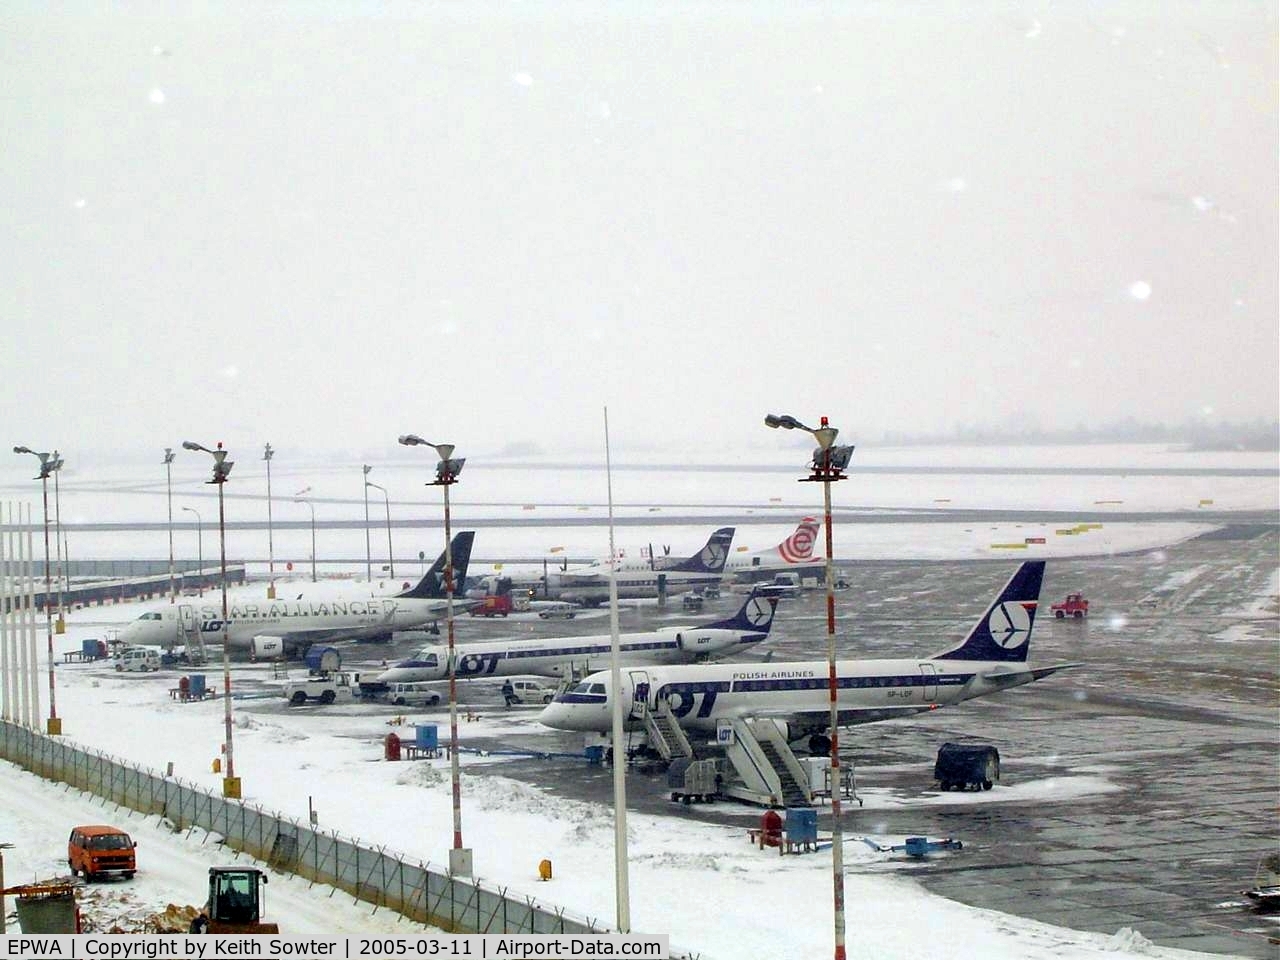 Warsaw Frederic Chopin Airport (formerly Okecie International Airport), Warsaw Poland (EPWA) - View in the snow from the public viewing area